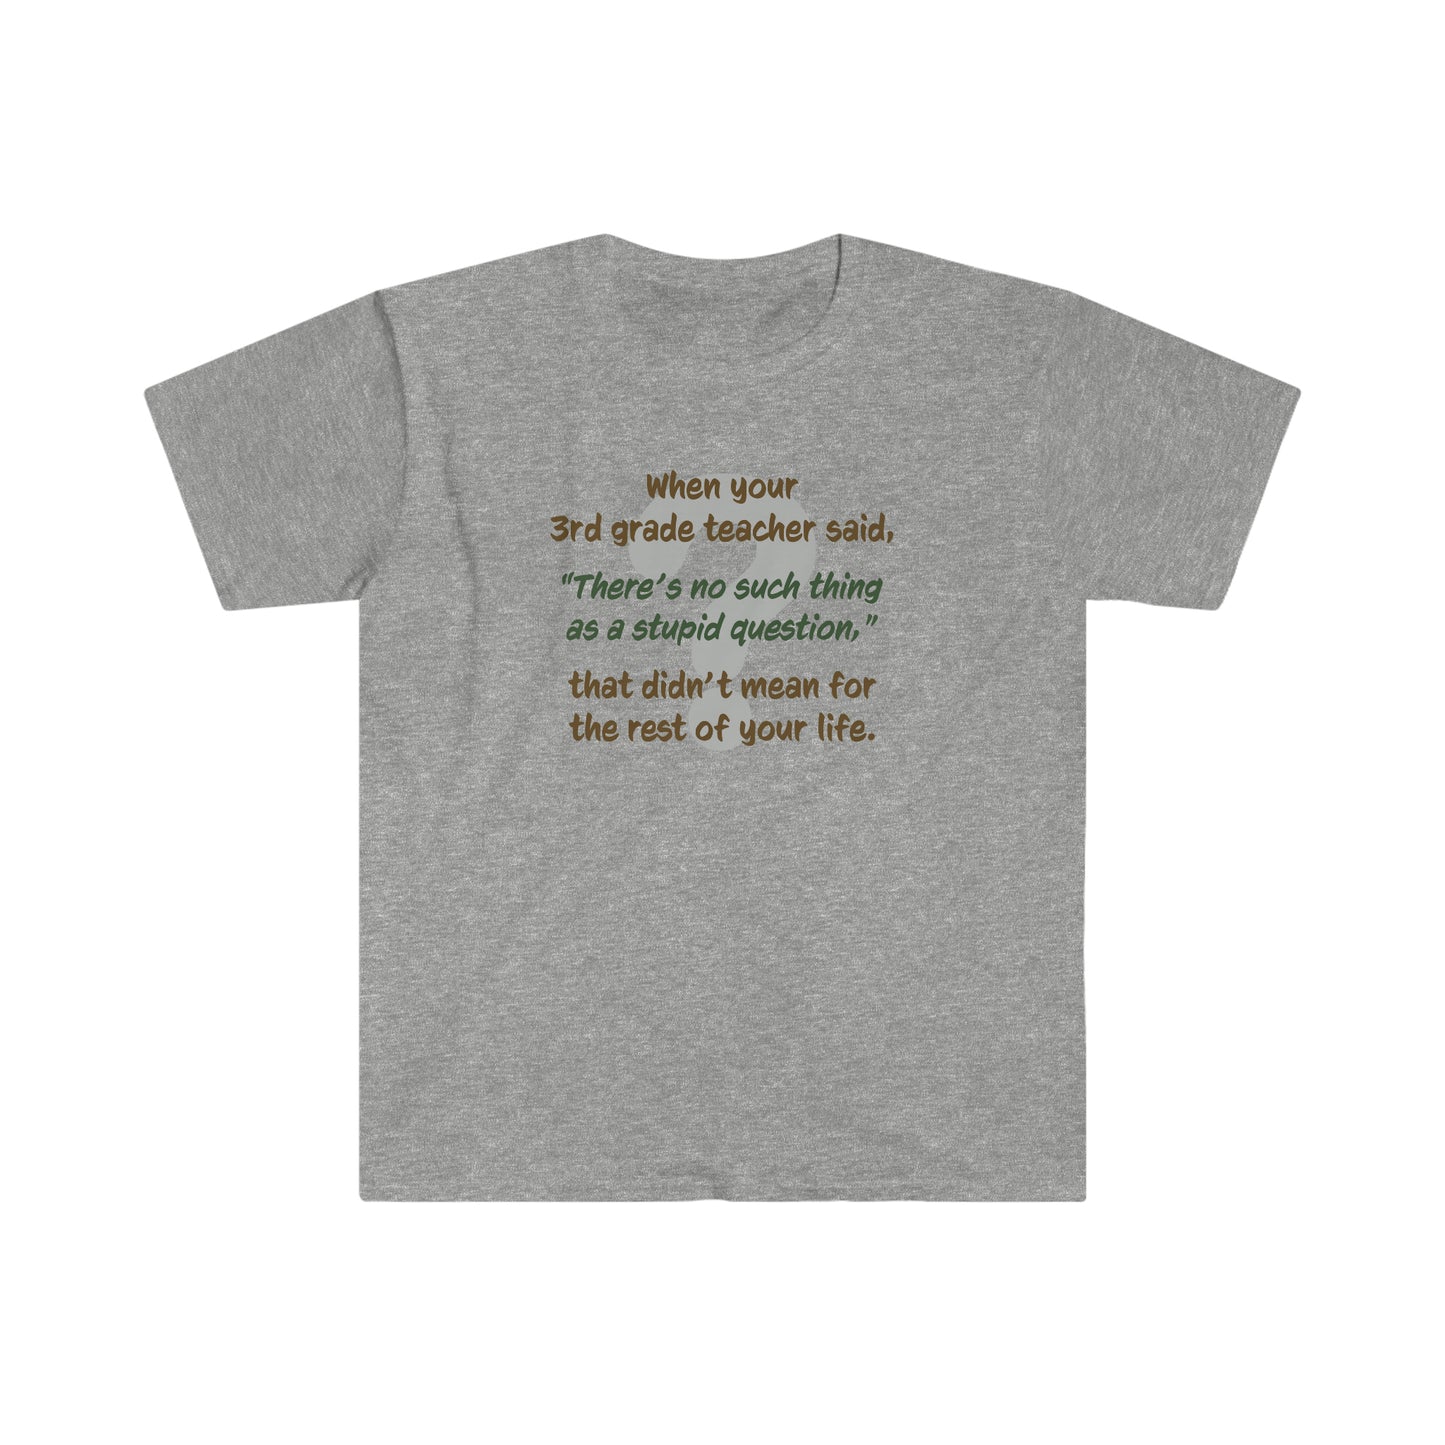 No Such Thing as a Stupid Question - Unisex T-Shirt